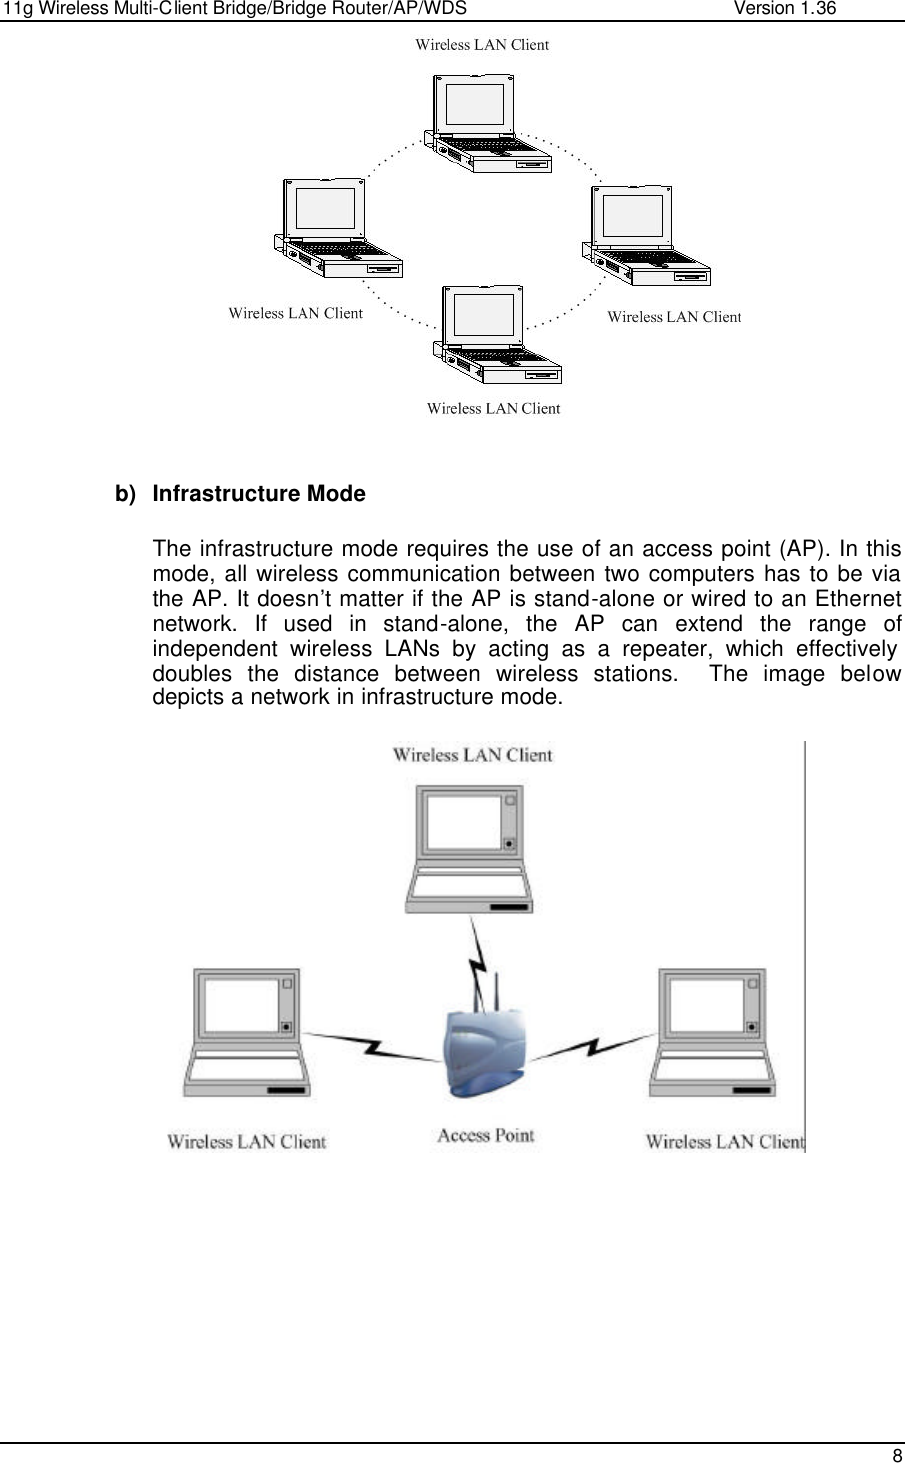 11g Wireless Multi-Client Bridge/Bridge Router/AP/WDS                                                   Version 1.36    8                 b) Infrastructure Mode  The infrastructure mode requires the use of an access point (AP). In this mode, all wireless communication between two computers has to be via the AP. It doesn’t matter if the AP is stand-alone or wired to an Ethernet network. If used in stand-alone, the AP can extend the range of independent wireless LANs by acting as a repeater, which effectively doubles the distance between wireless stations.  The image below depicts a network in infrastructure mode.                    